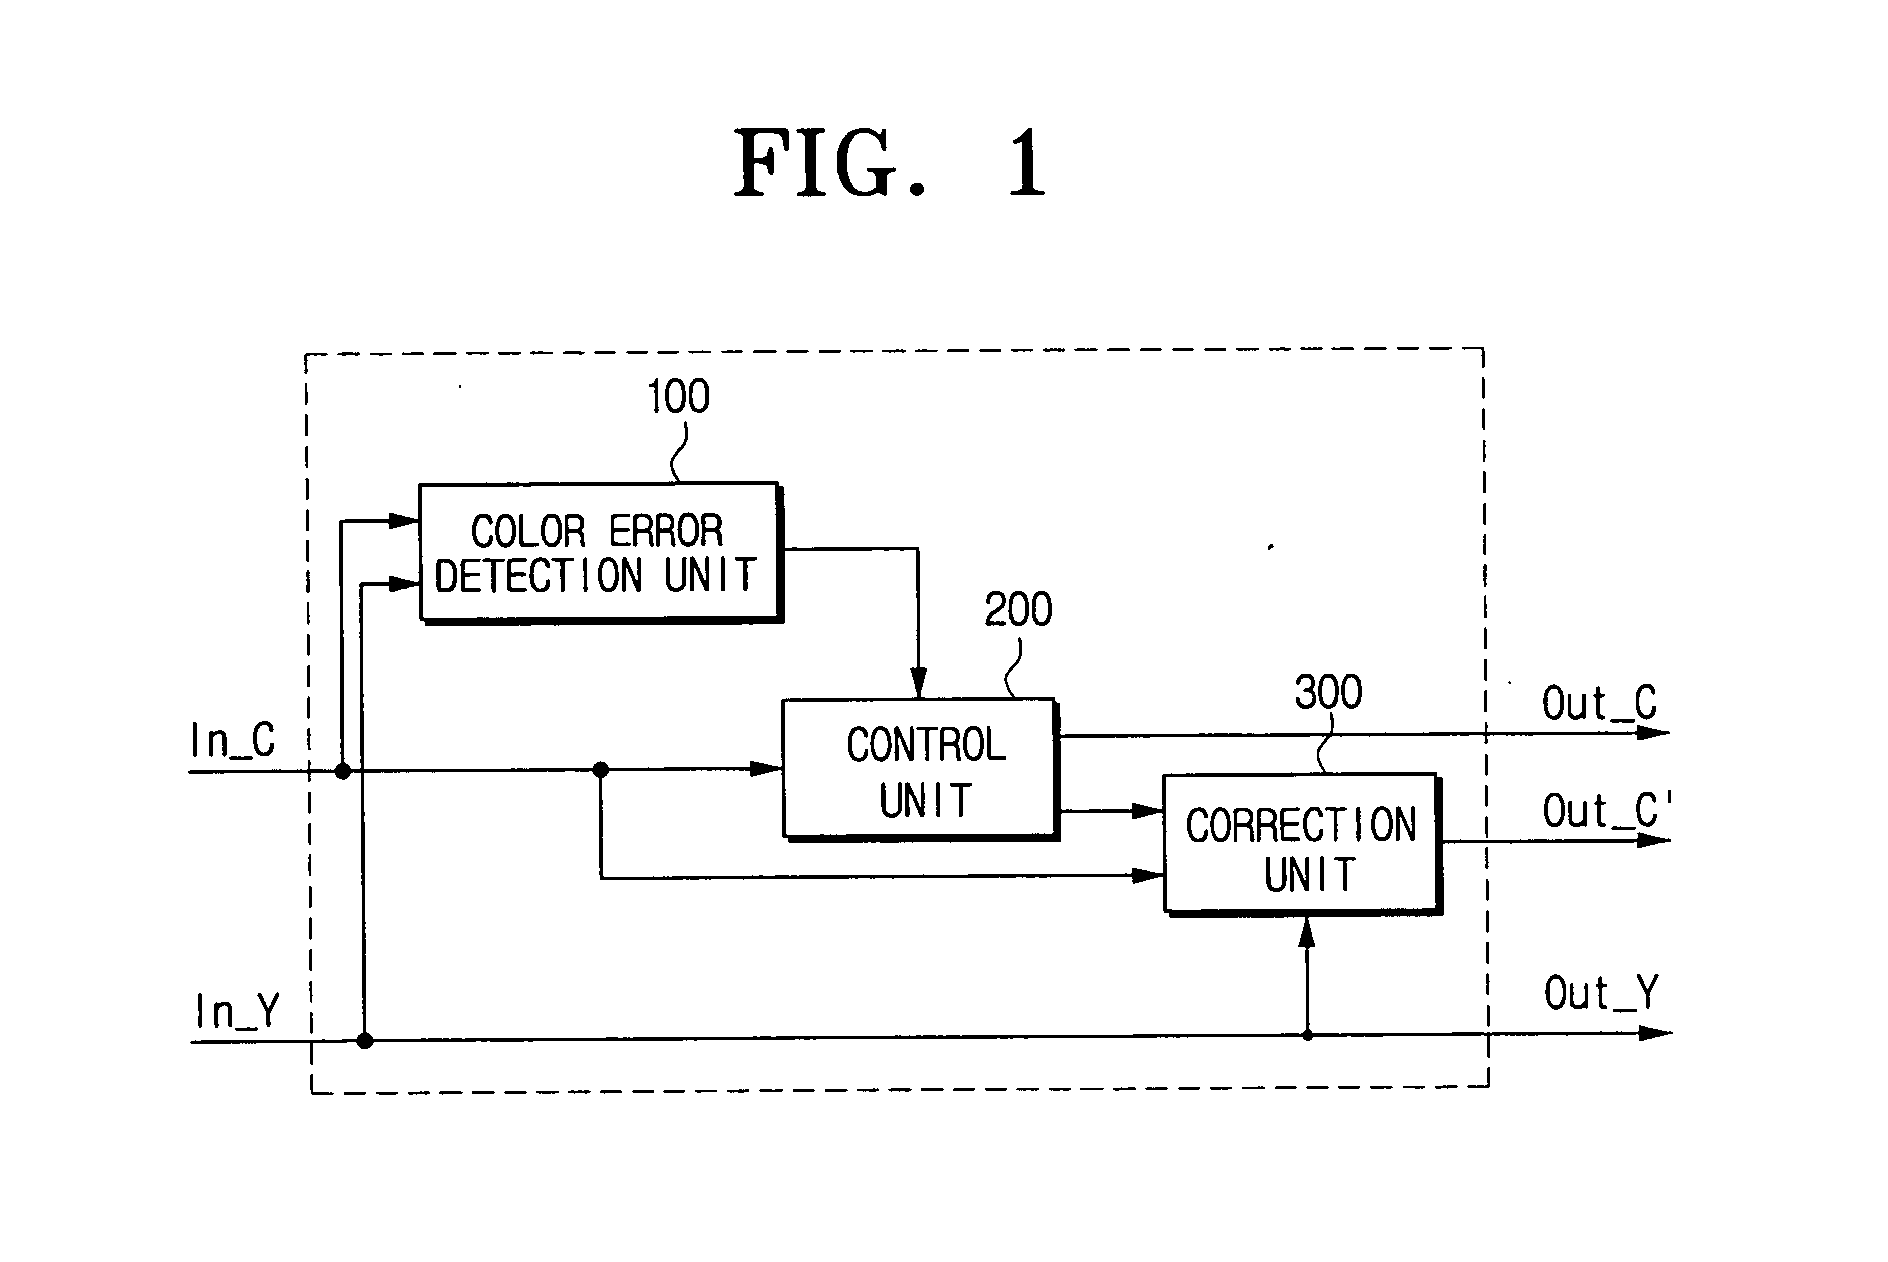 Apparatus and method for correcting color error by adaptively filtering chrominance signals